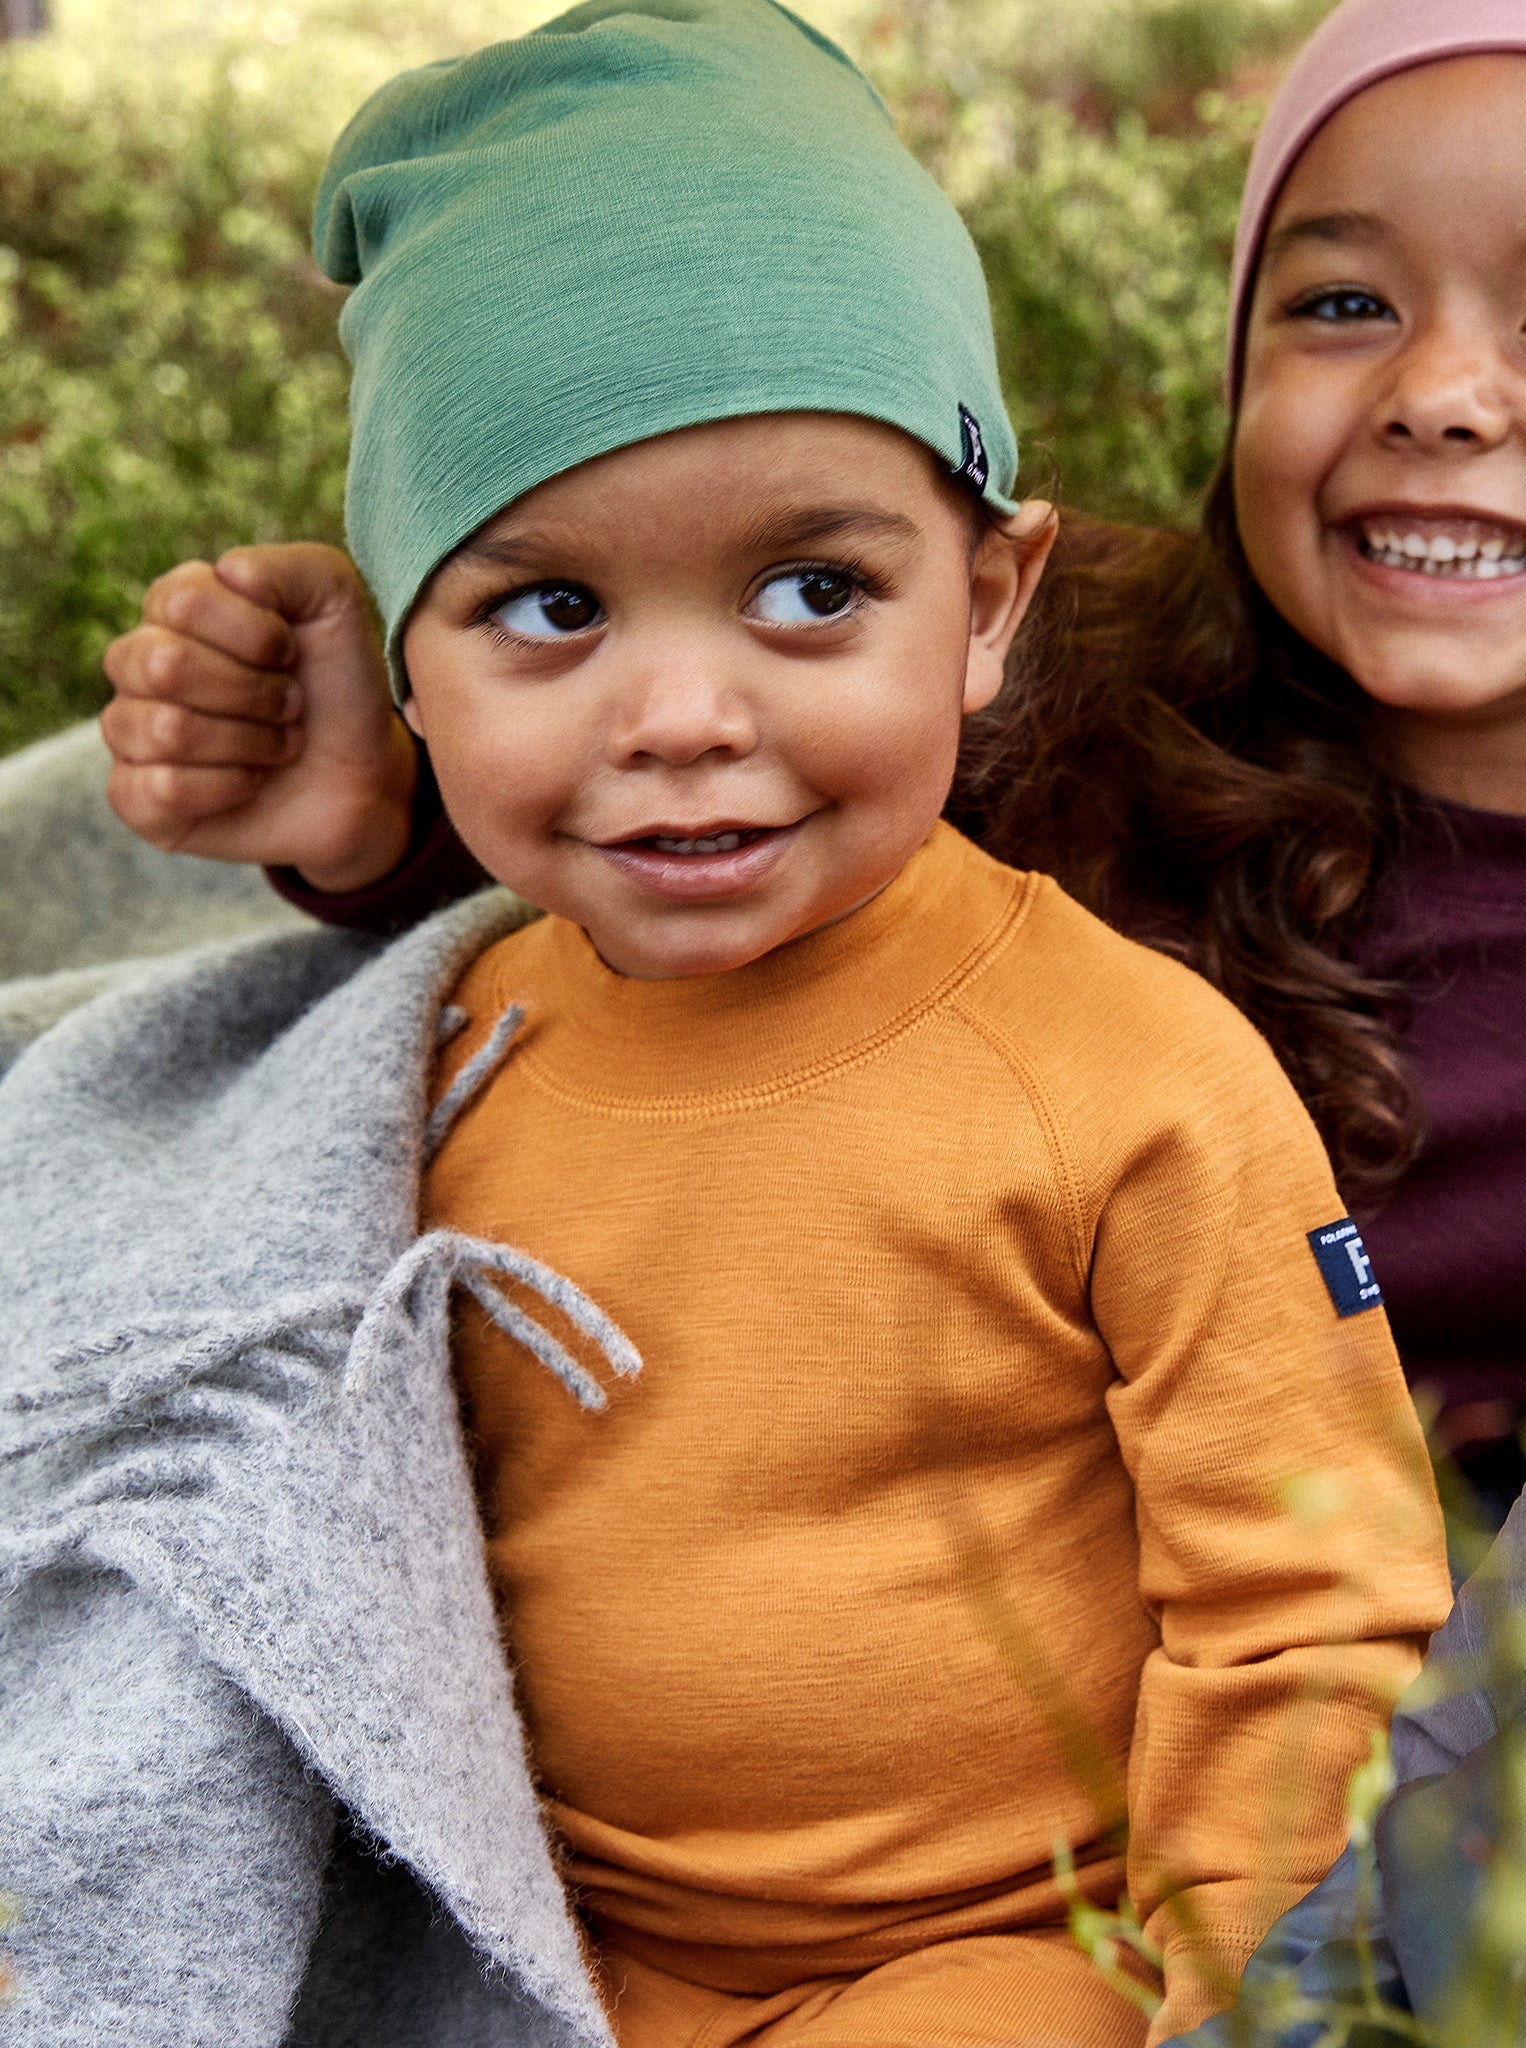 Merino Wool Green Kids Beanie Hat from the Polarn O. Pyret kidswear collection. Ethically produced outerwear.